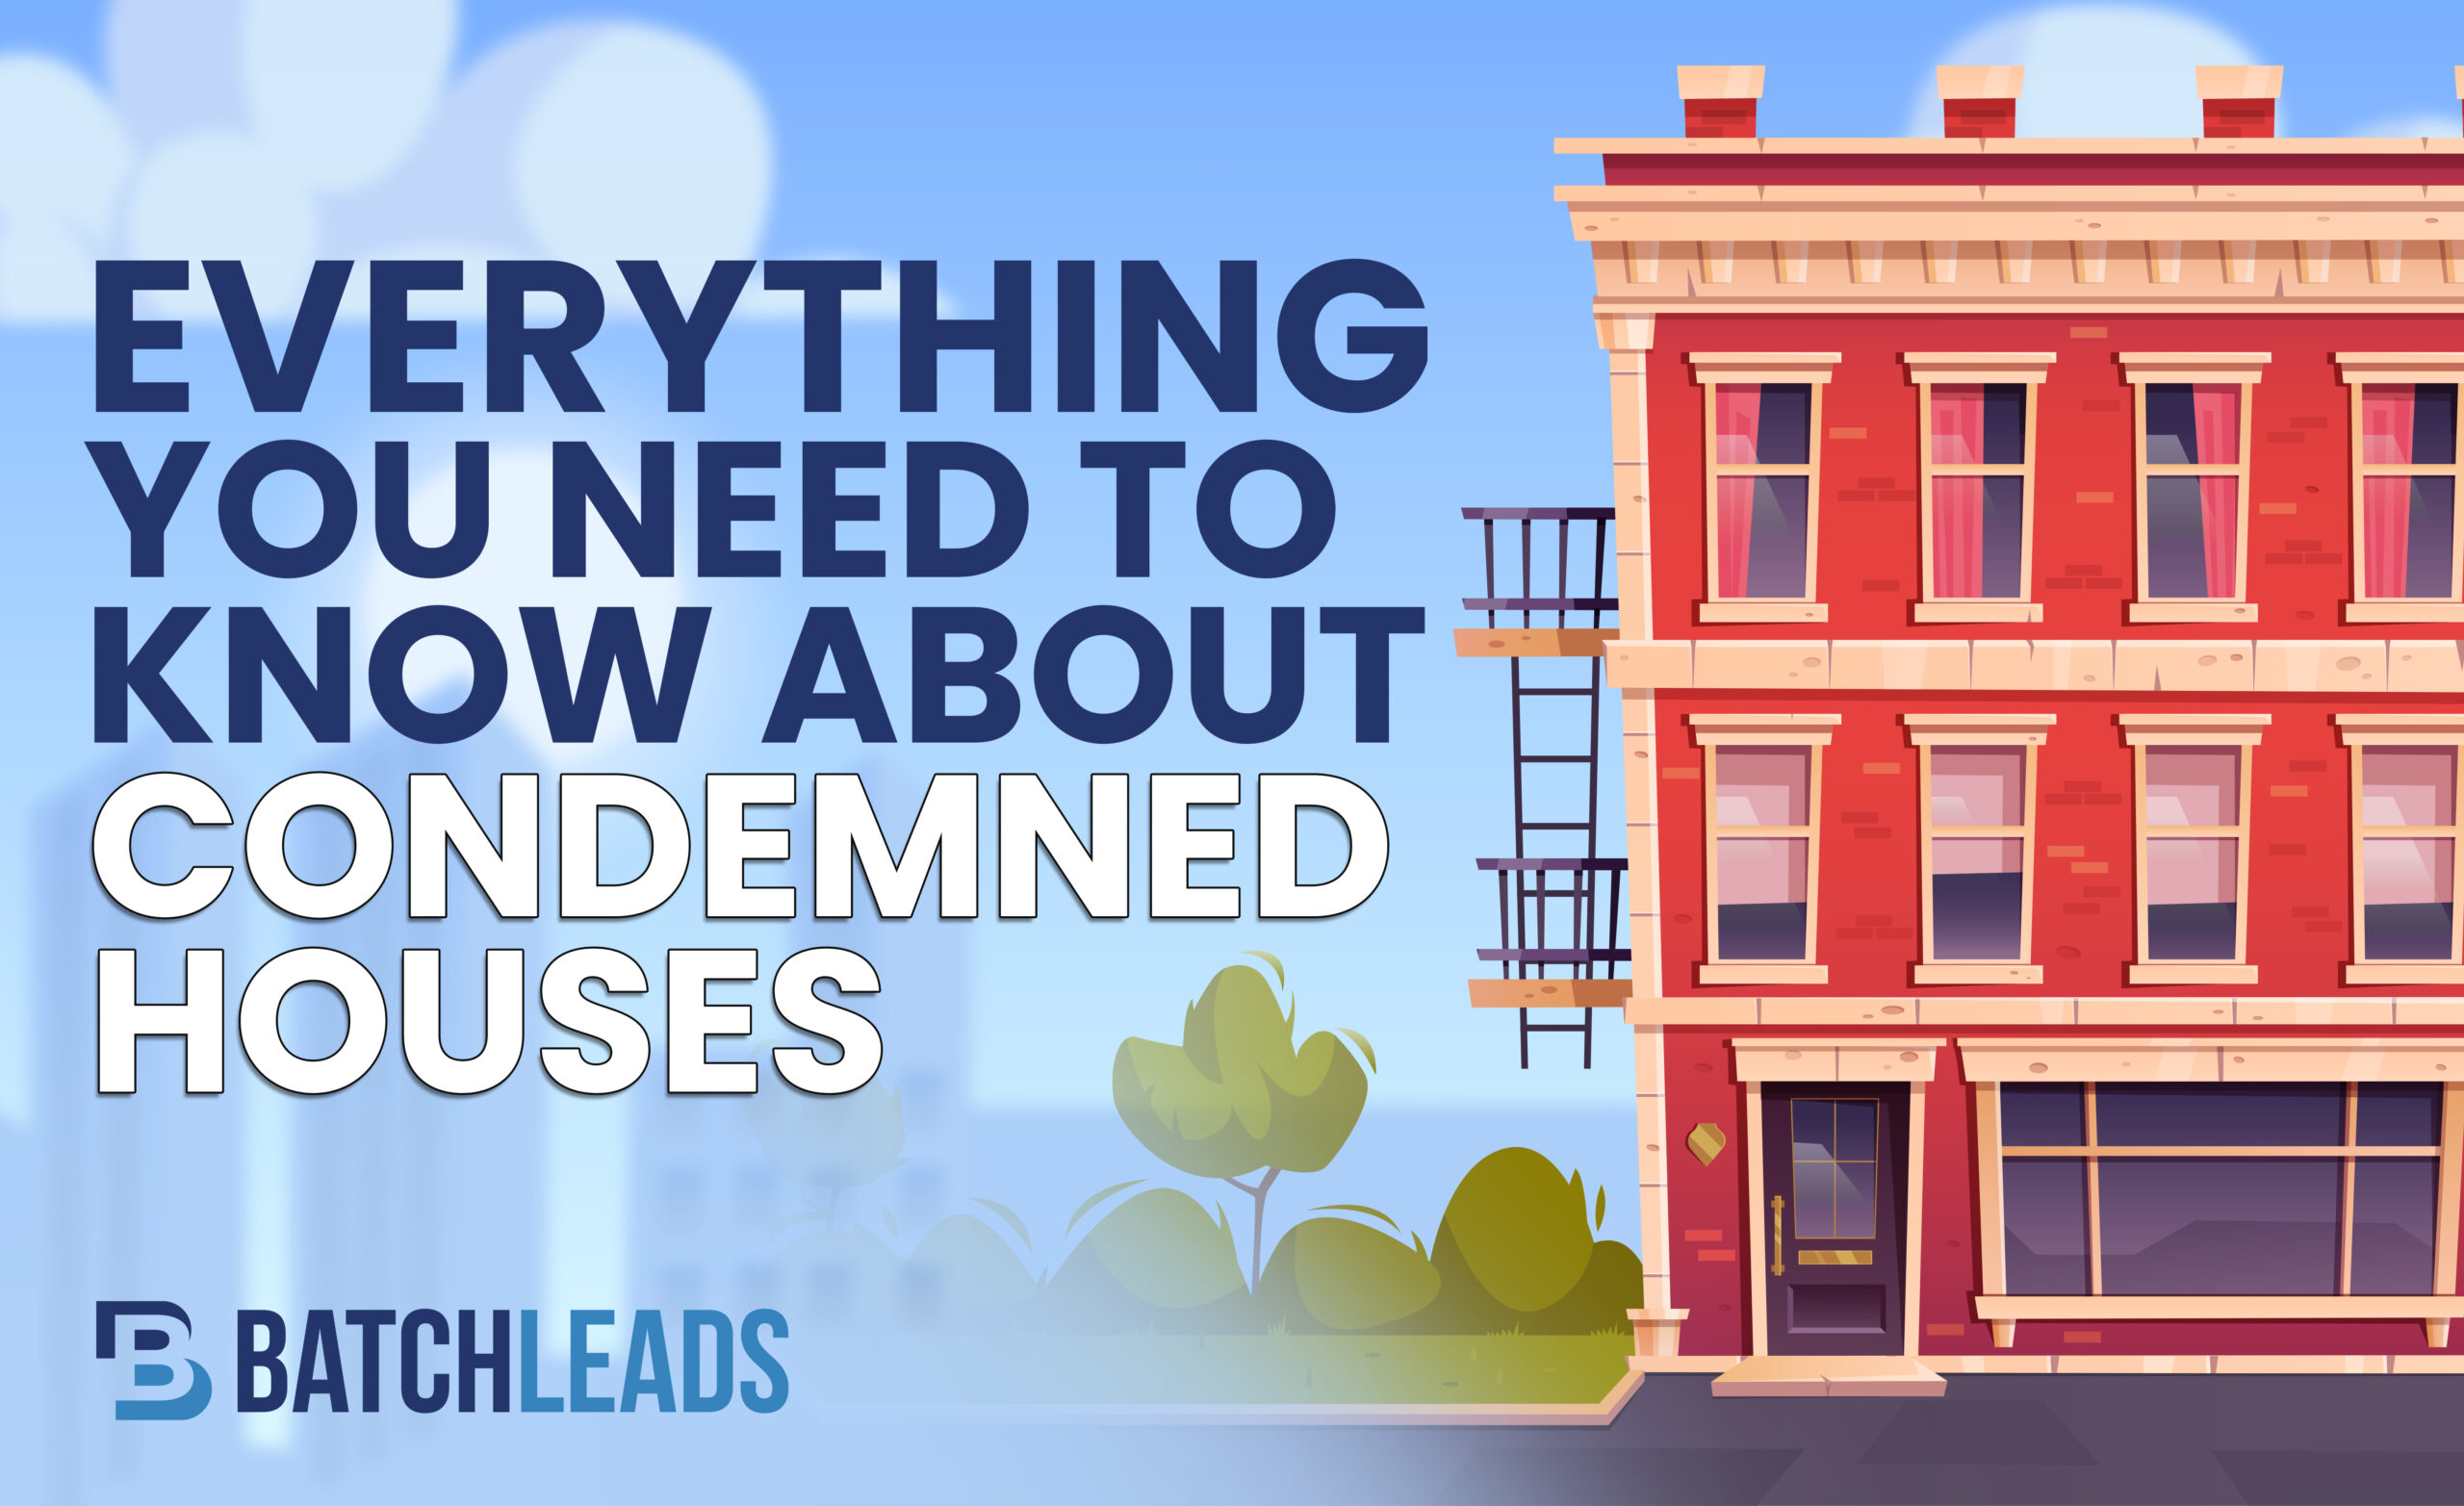 Everything You Need to Know About Condemned Houses